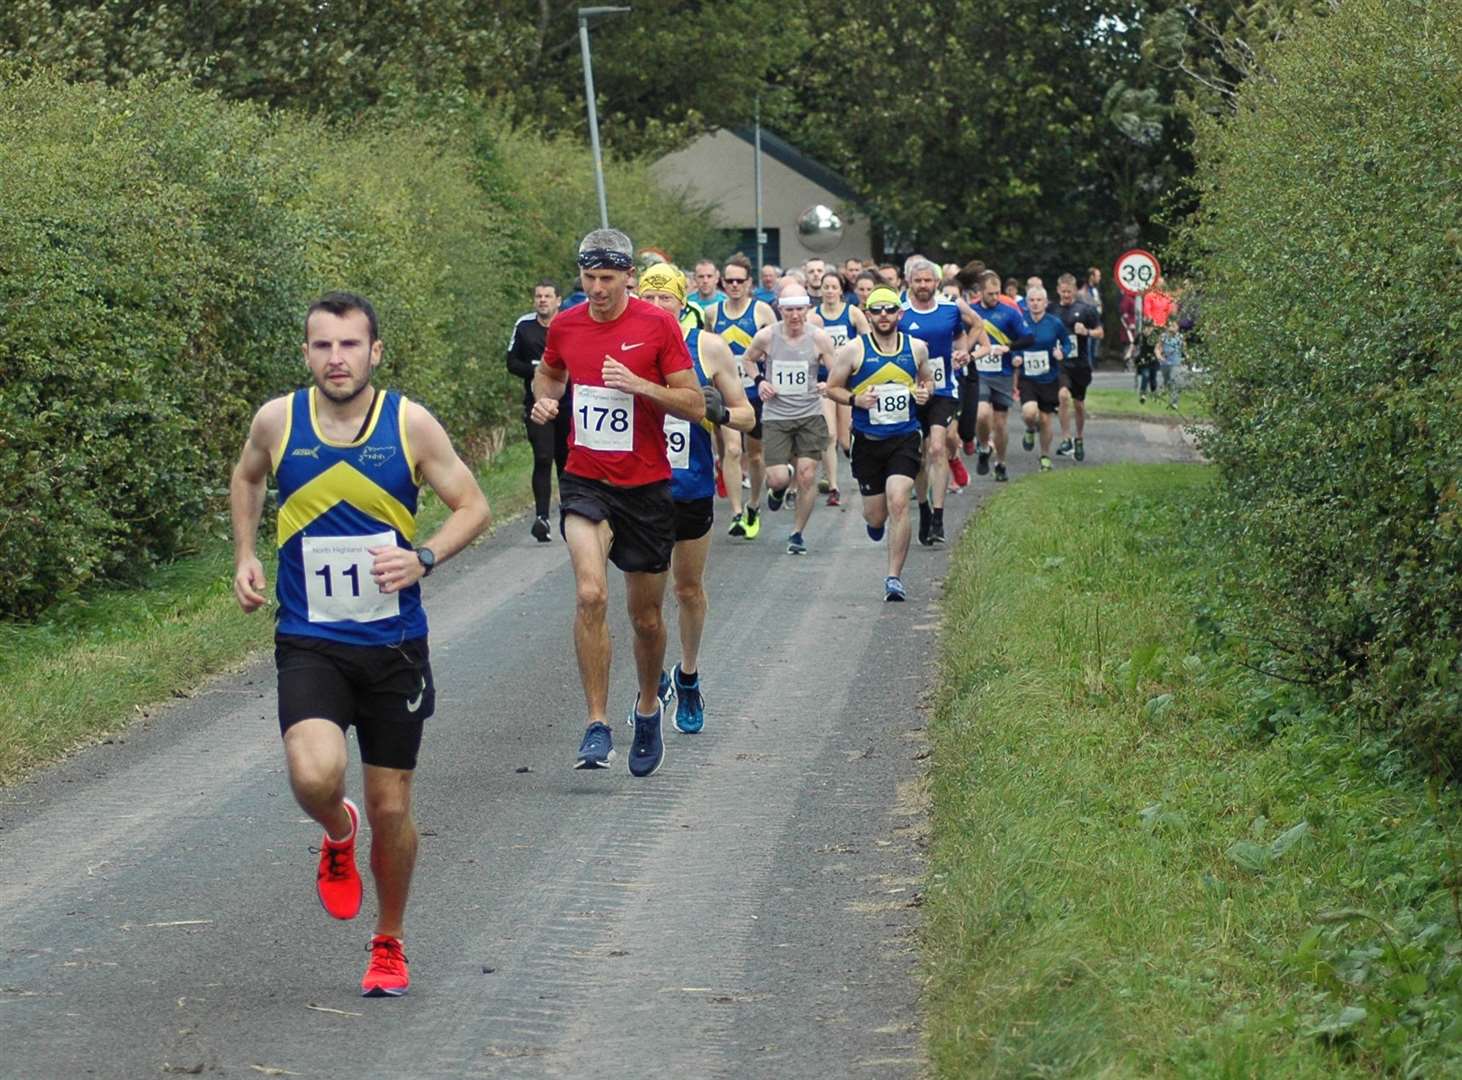 Greg Shearer led from the start in the North Highland Harriers' Caithness Half Marathon.